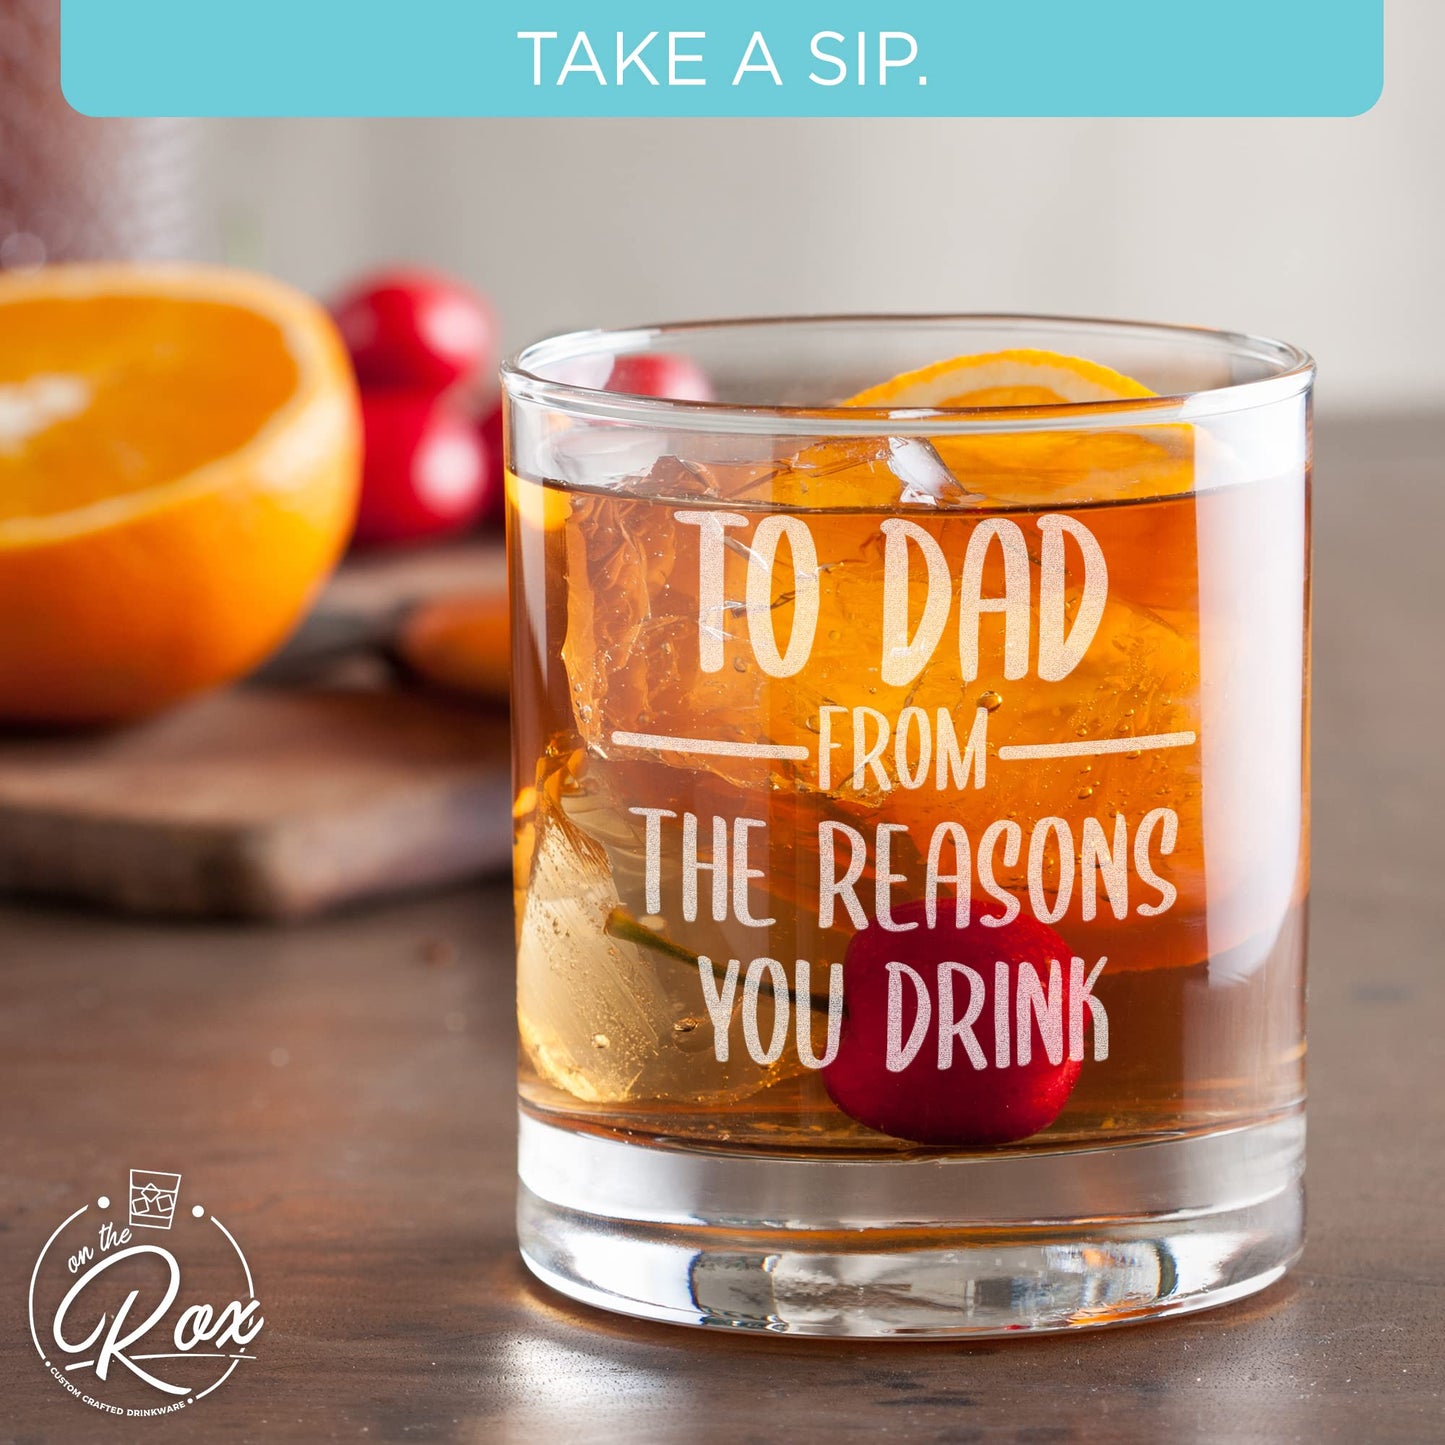 Whiskey Gifts for Dad- 11 Oz "Dad Reason" Engraved Whiskey Glass - Father's Day Gift, Dad Birthday Gifts From Daughter, Wife or Son - Dad Bourbon Glass - Old Fashion Glass - 6 Designs To Choose From